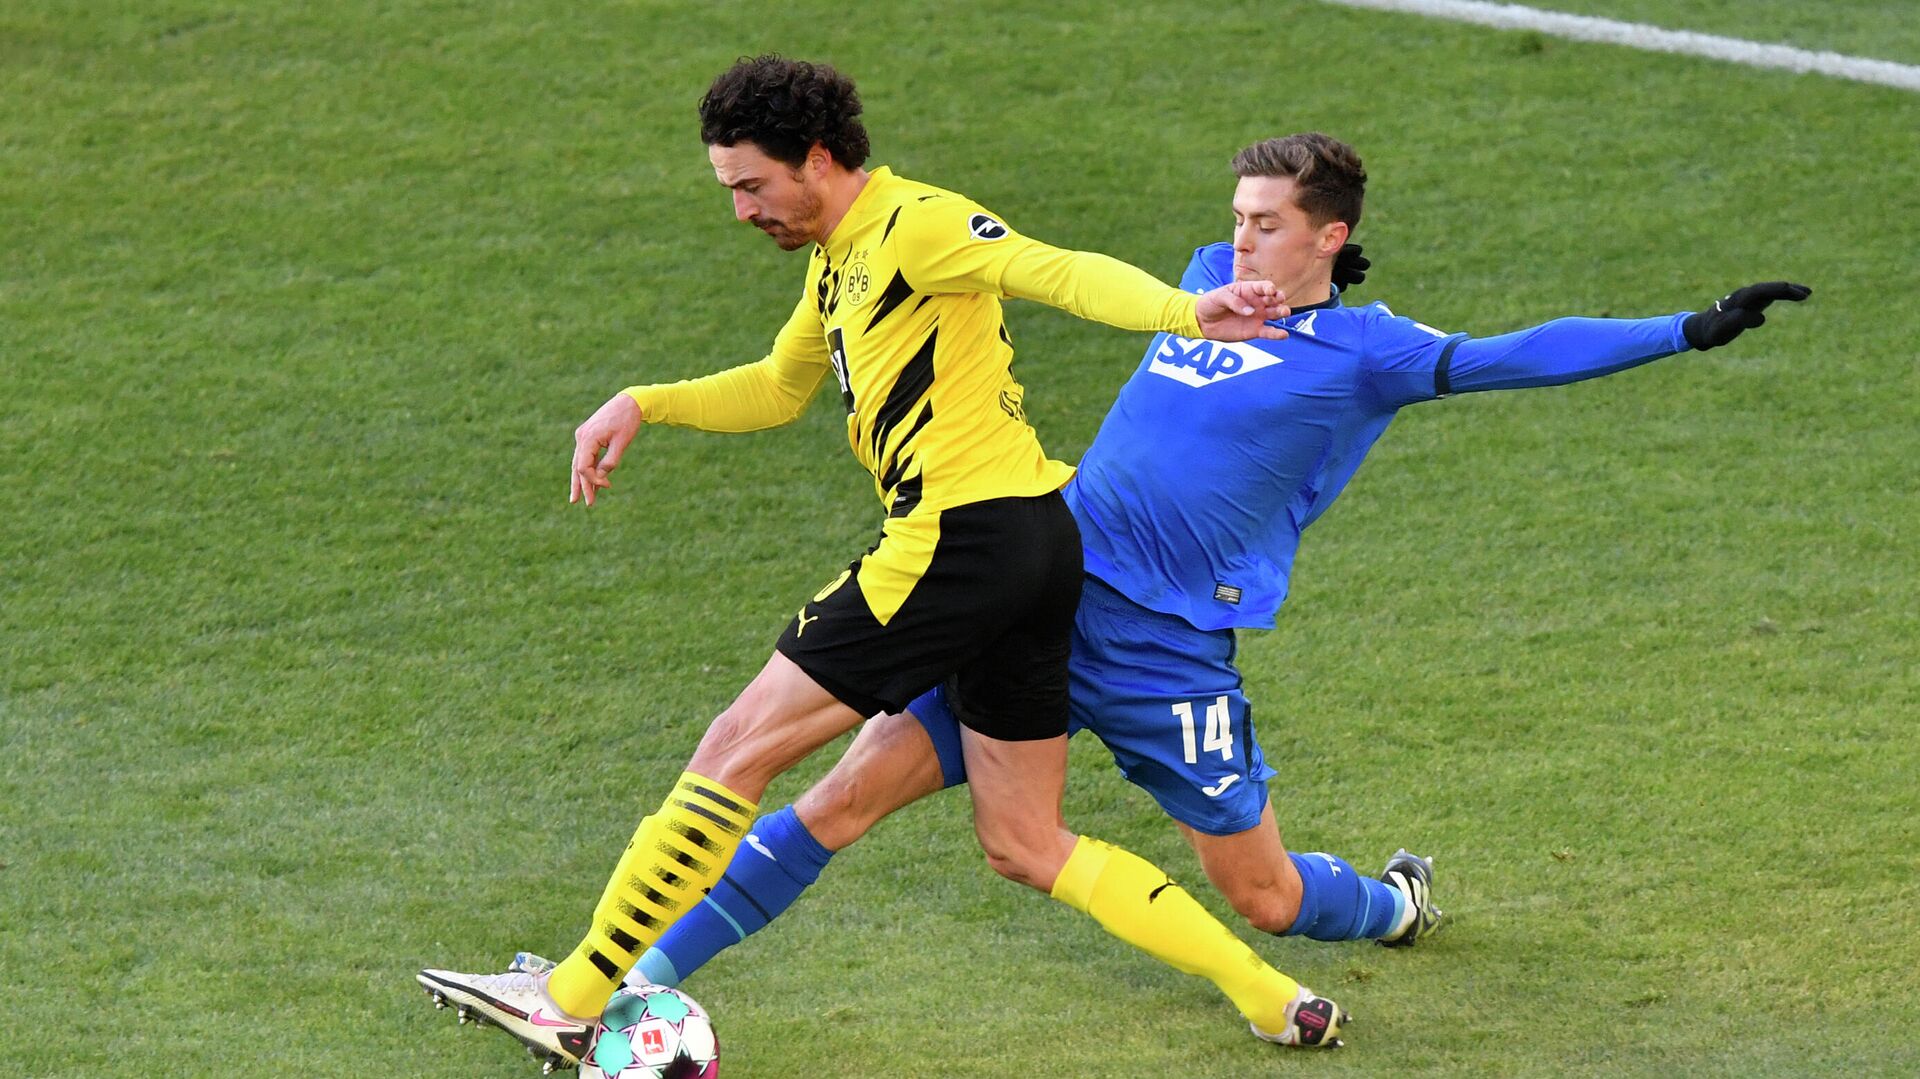 Hoffenheim's Austrian midfielder Christoph Baumgartner (R) and Dortmund's Danish midfielder Thomas Delaney vie for the ball during the German first division Bundesliga football match between Borussia Dortmund and TSG 1899 Hoffenheim in Dortmund, western Germany, on February 13, 2021. (Photo by Martin Meissner / POOL / AFP) / DFL REGULATIONS PROHIBIT ANY USE OF PHOTOGRAPHS AS IMAGE SEQUENCES AND/OR QUASI-VIDEO - РИА Новости, 1920, 13.02.2021